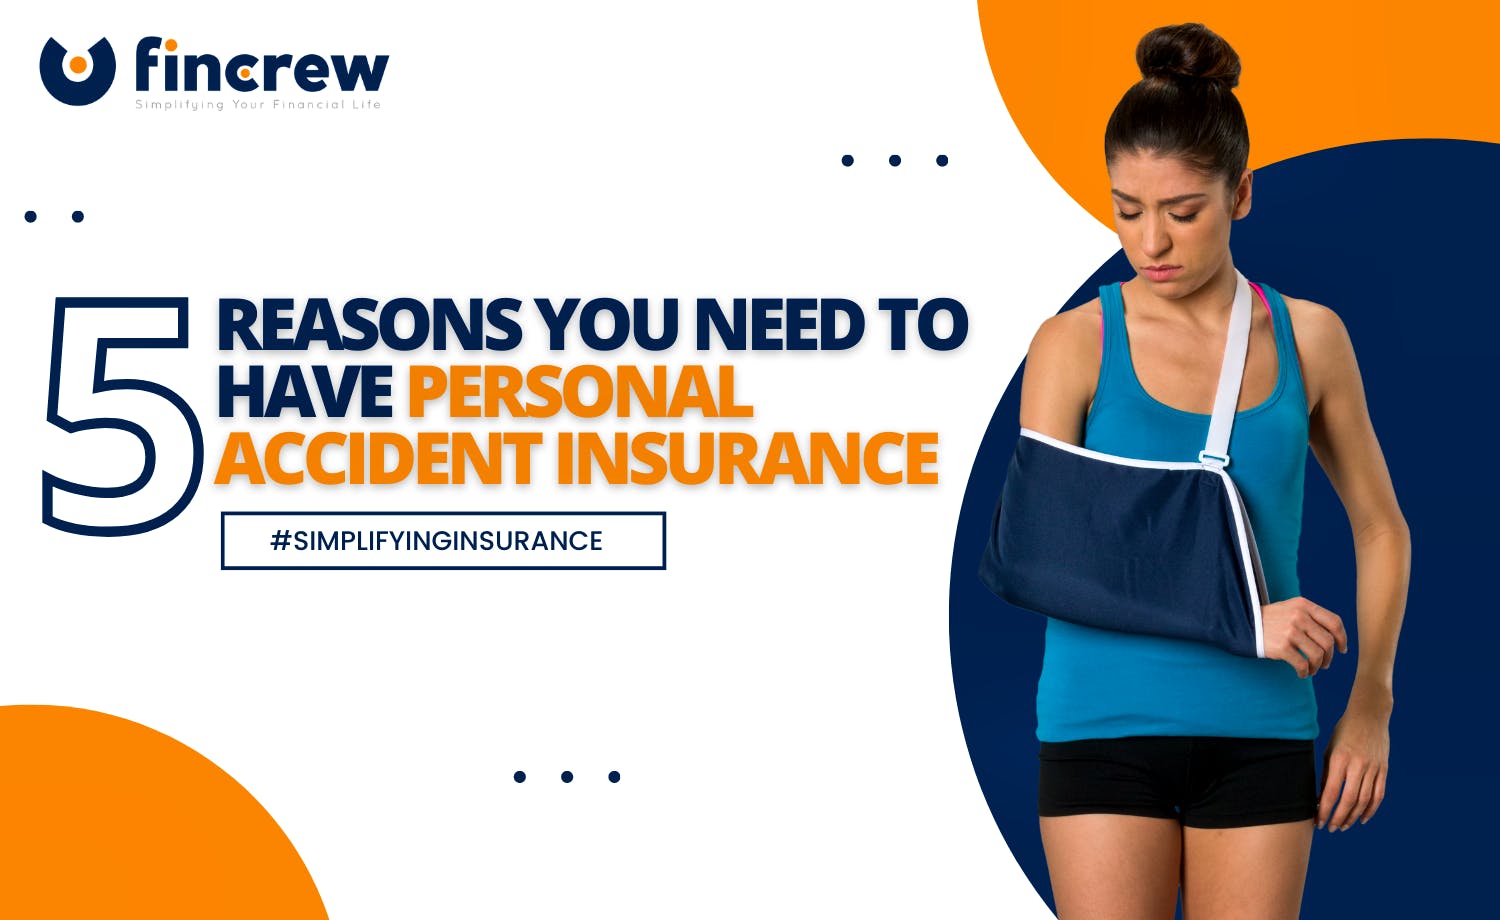 Reasons You Need To Have Personal Accident Insurance